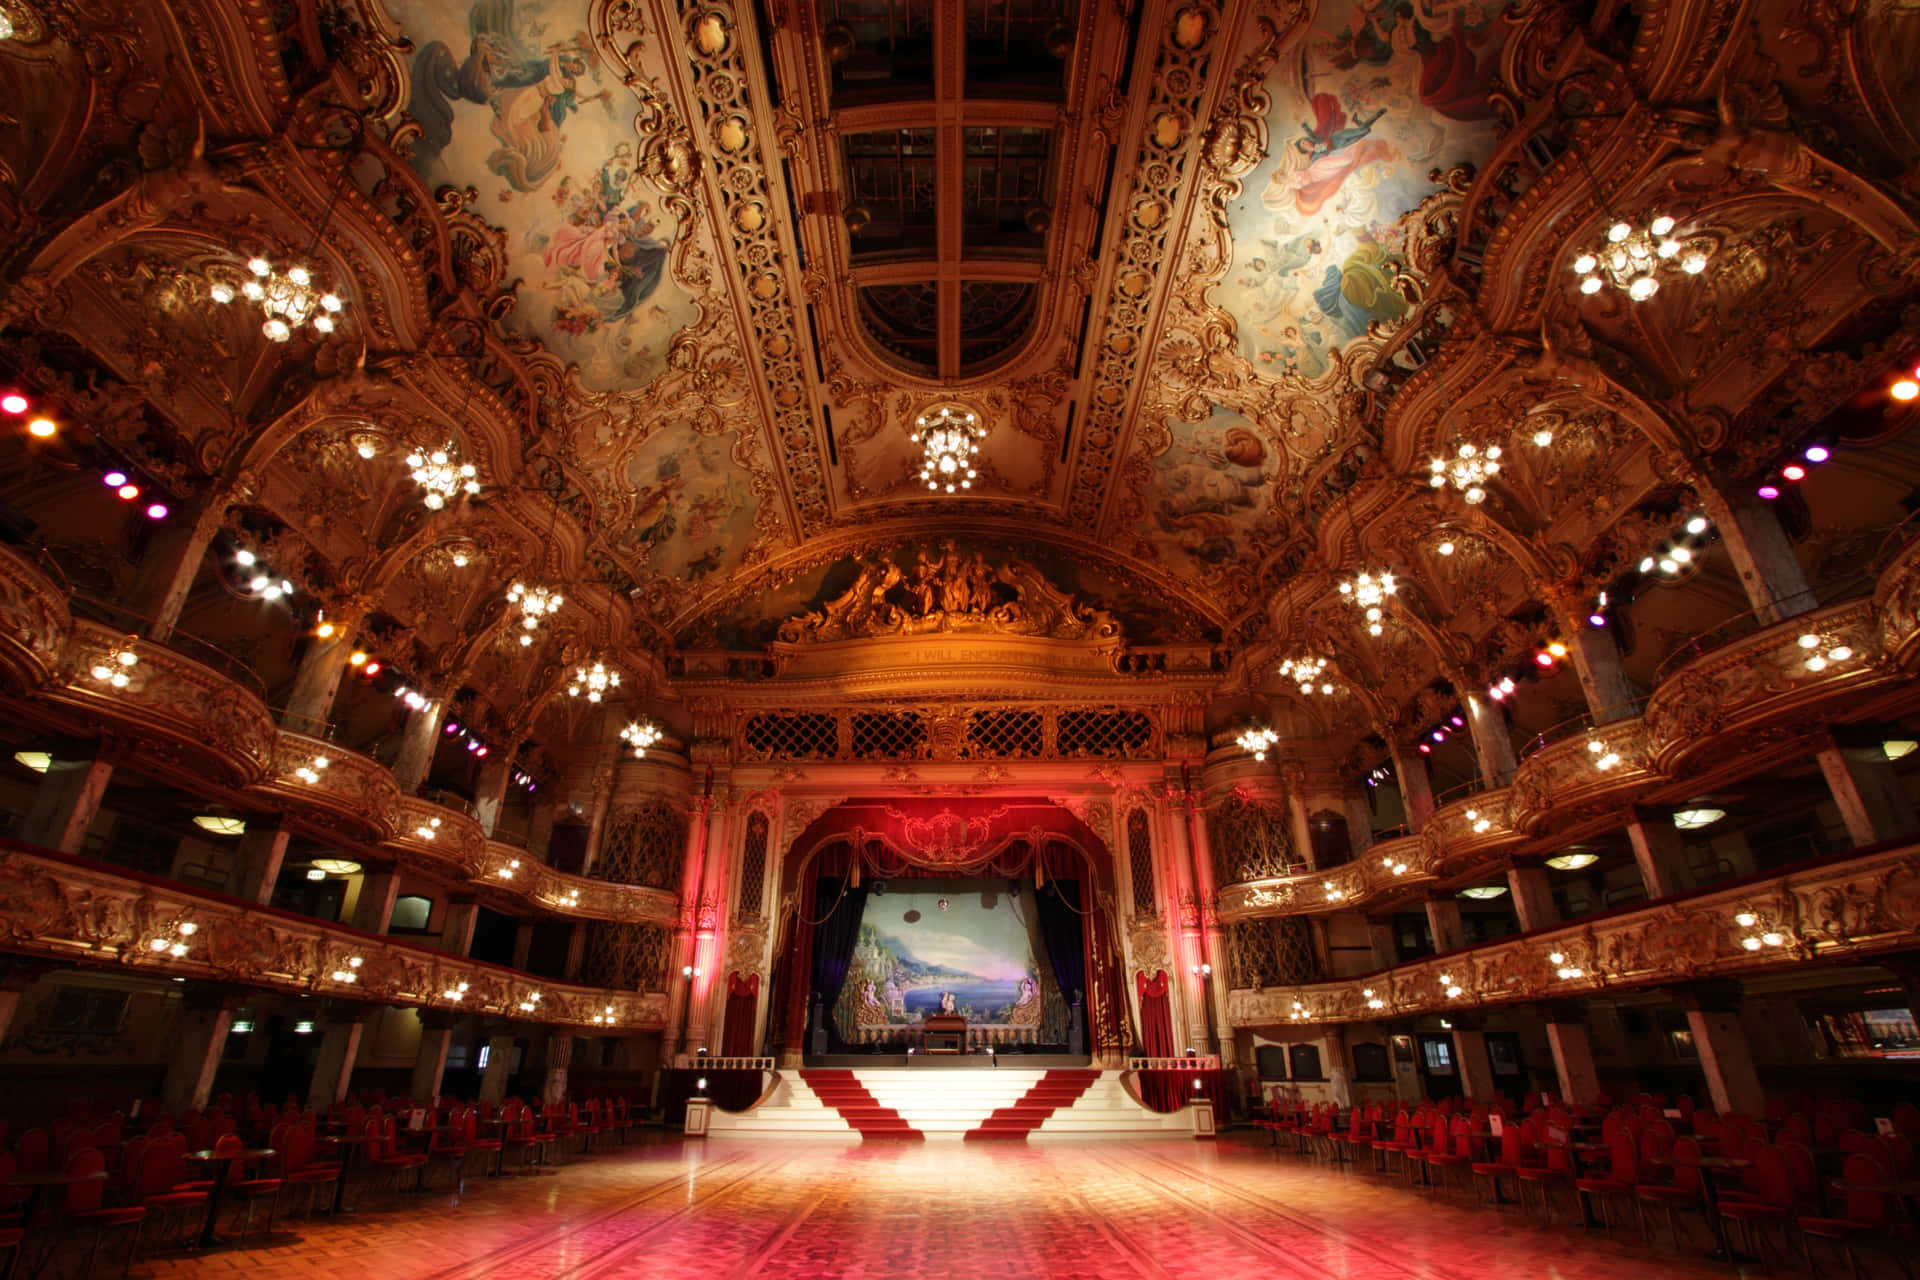 A Large Ballroom With A Large Ceiling